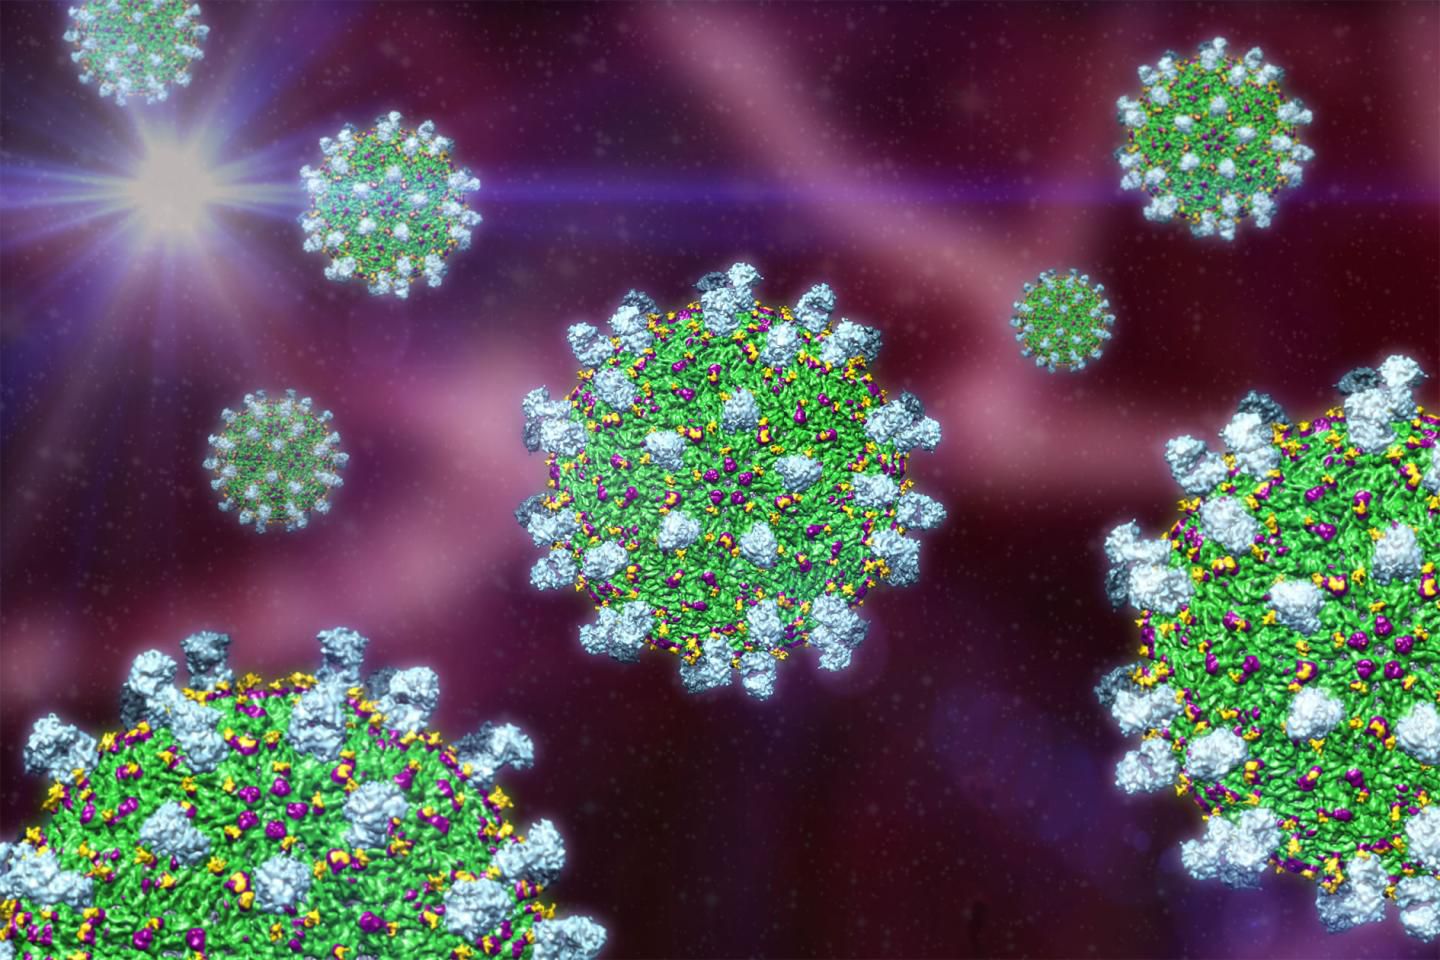 CAPTION This is a reconstructed visual of dengue virus serotype 3 bound with antigen-binding fragments of super-potent antibody 5J7  CREDIT Guntur Fibriansah  USAGE RESTRICTIONS Please give credit to the source of the image and Duke-NUS Graduate Medical School Singapore.